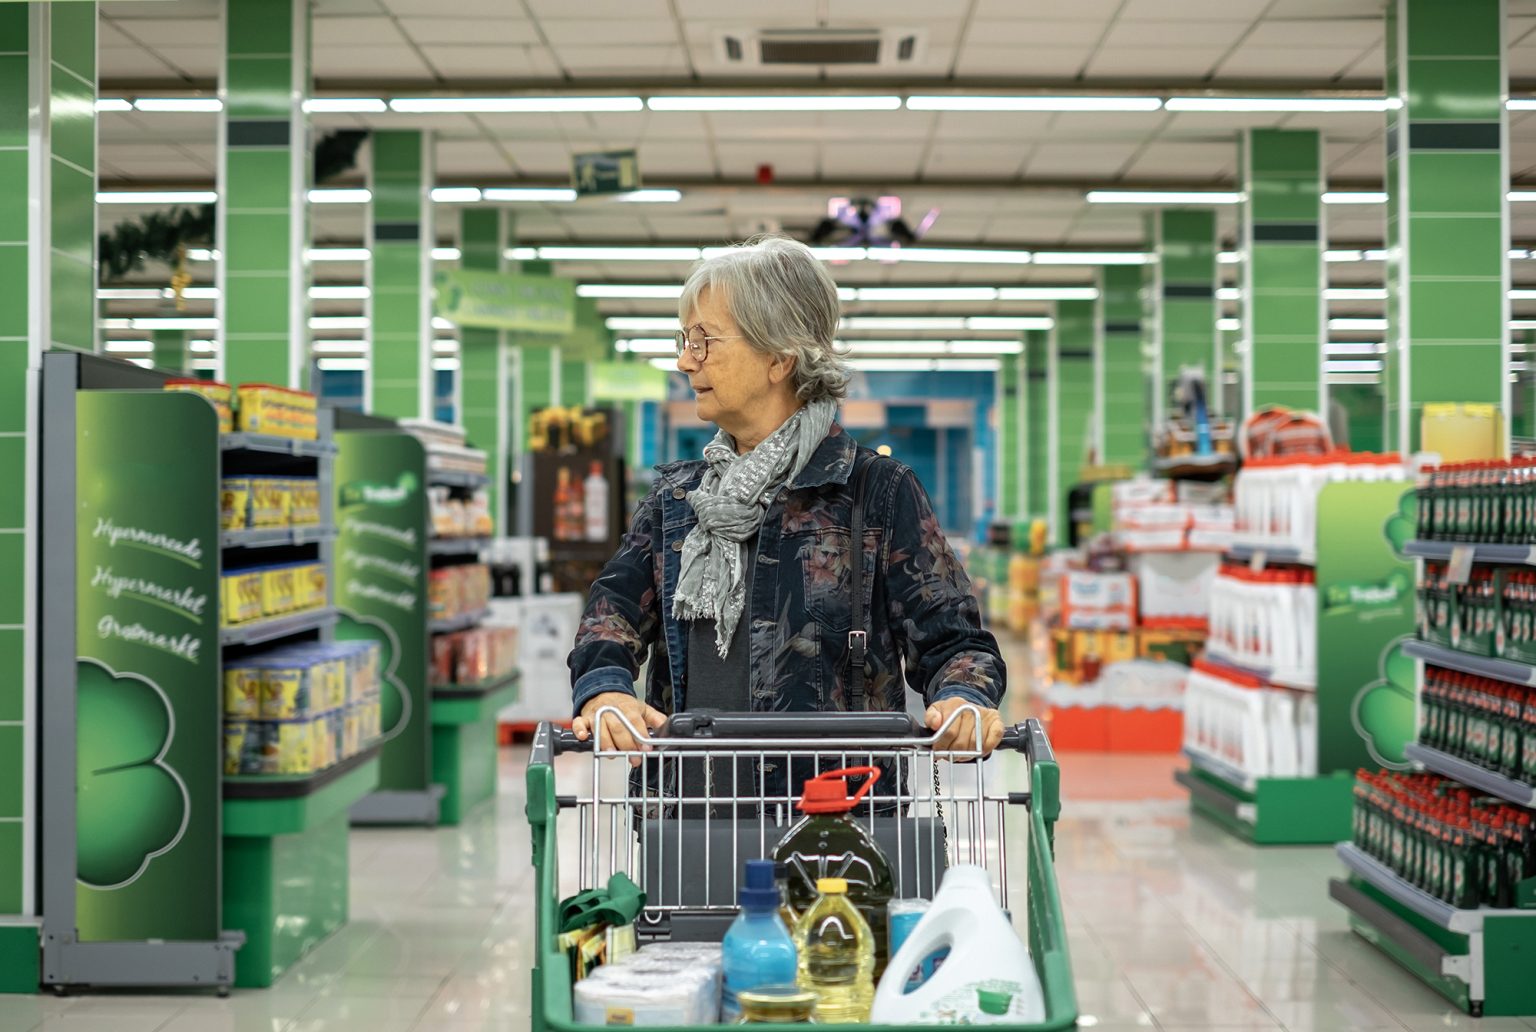 senior woman pushing cart in supermarket looking at the products on display